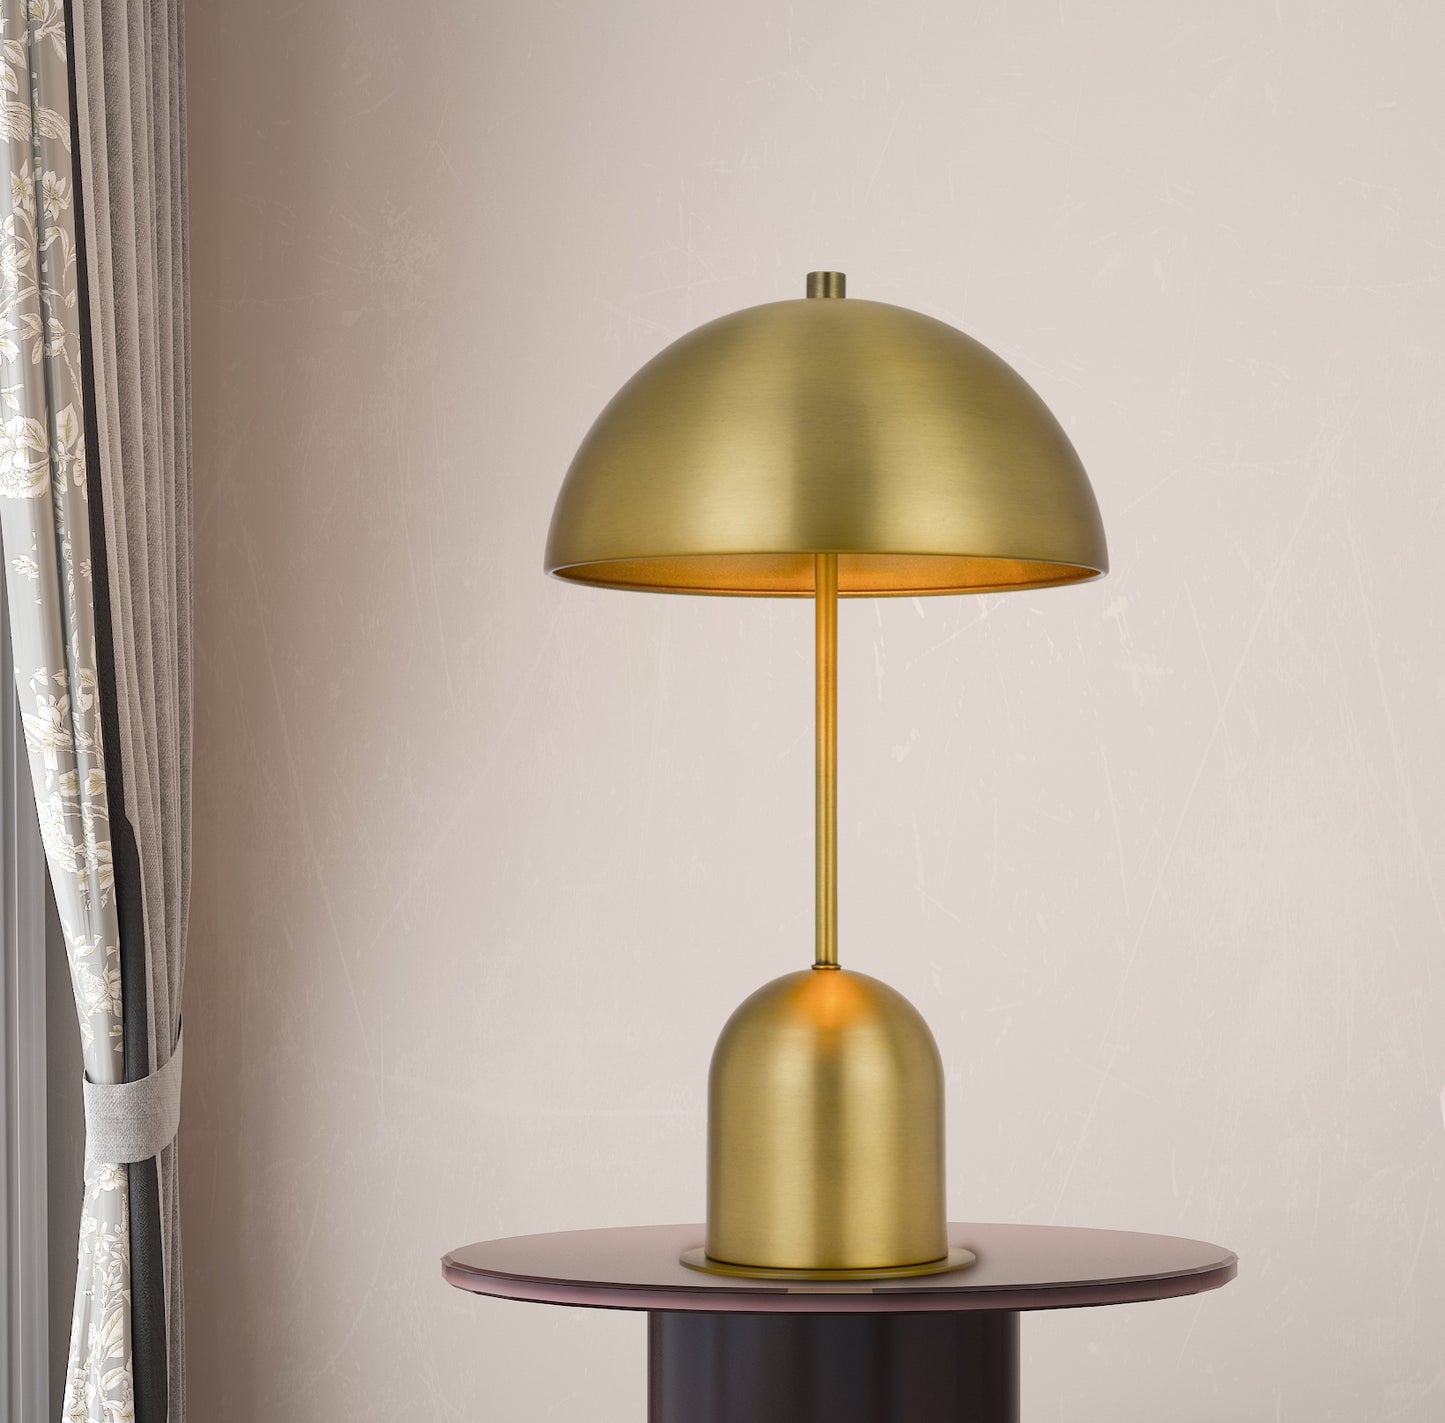 20" Antiqued Brass Metal Desk Table Lamp With Antiqued Brass Dome Shade